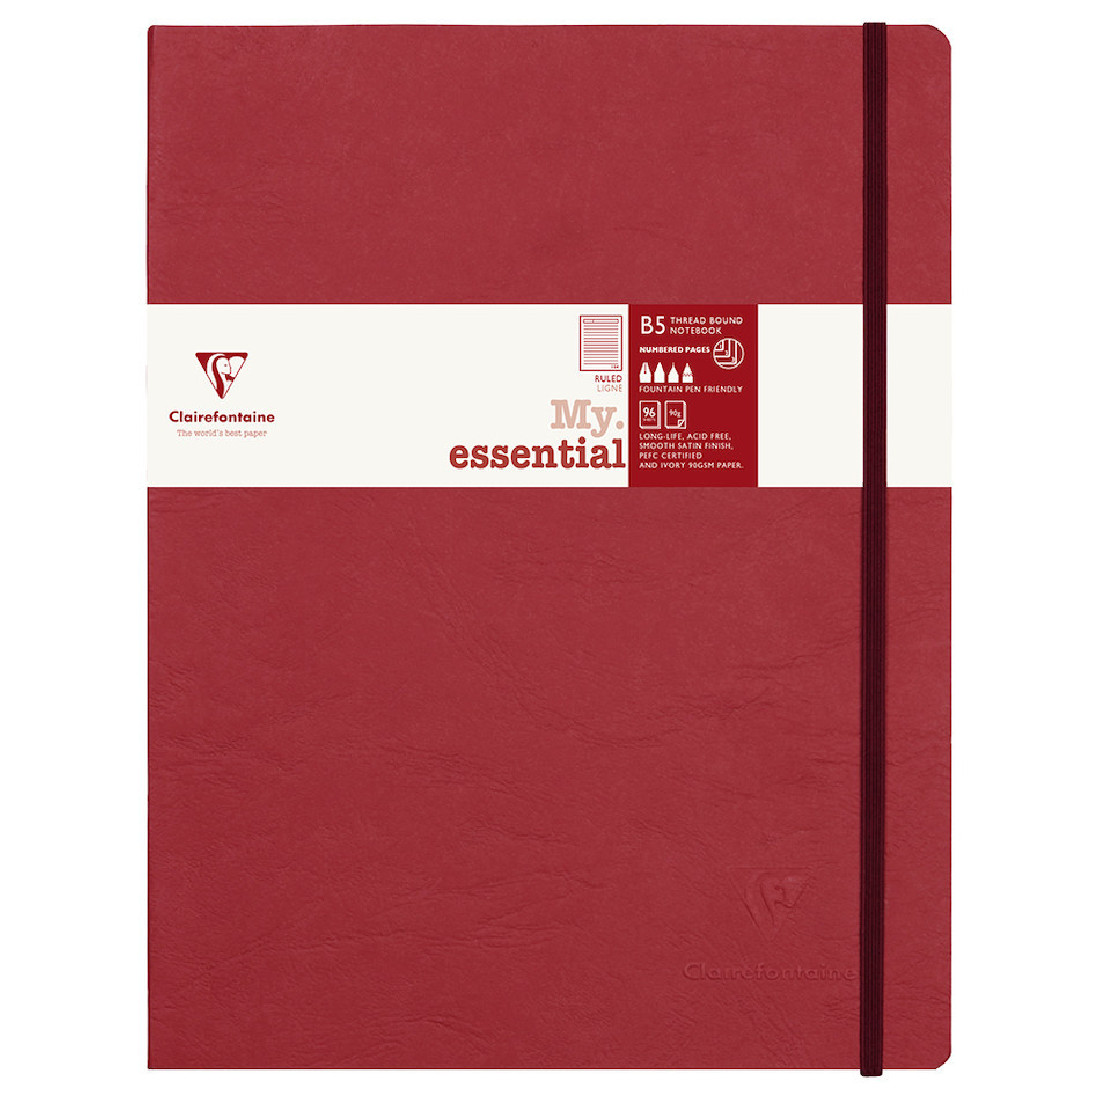 Clairefontaine notebook my.essential B5 19X25 cm, red, lined,  90g